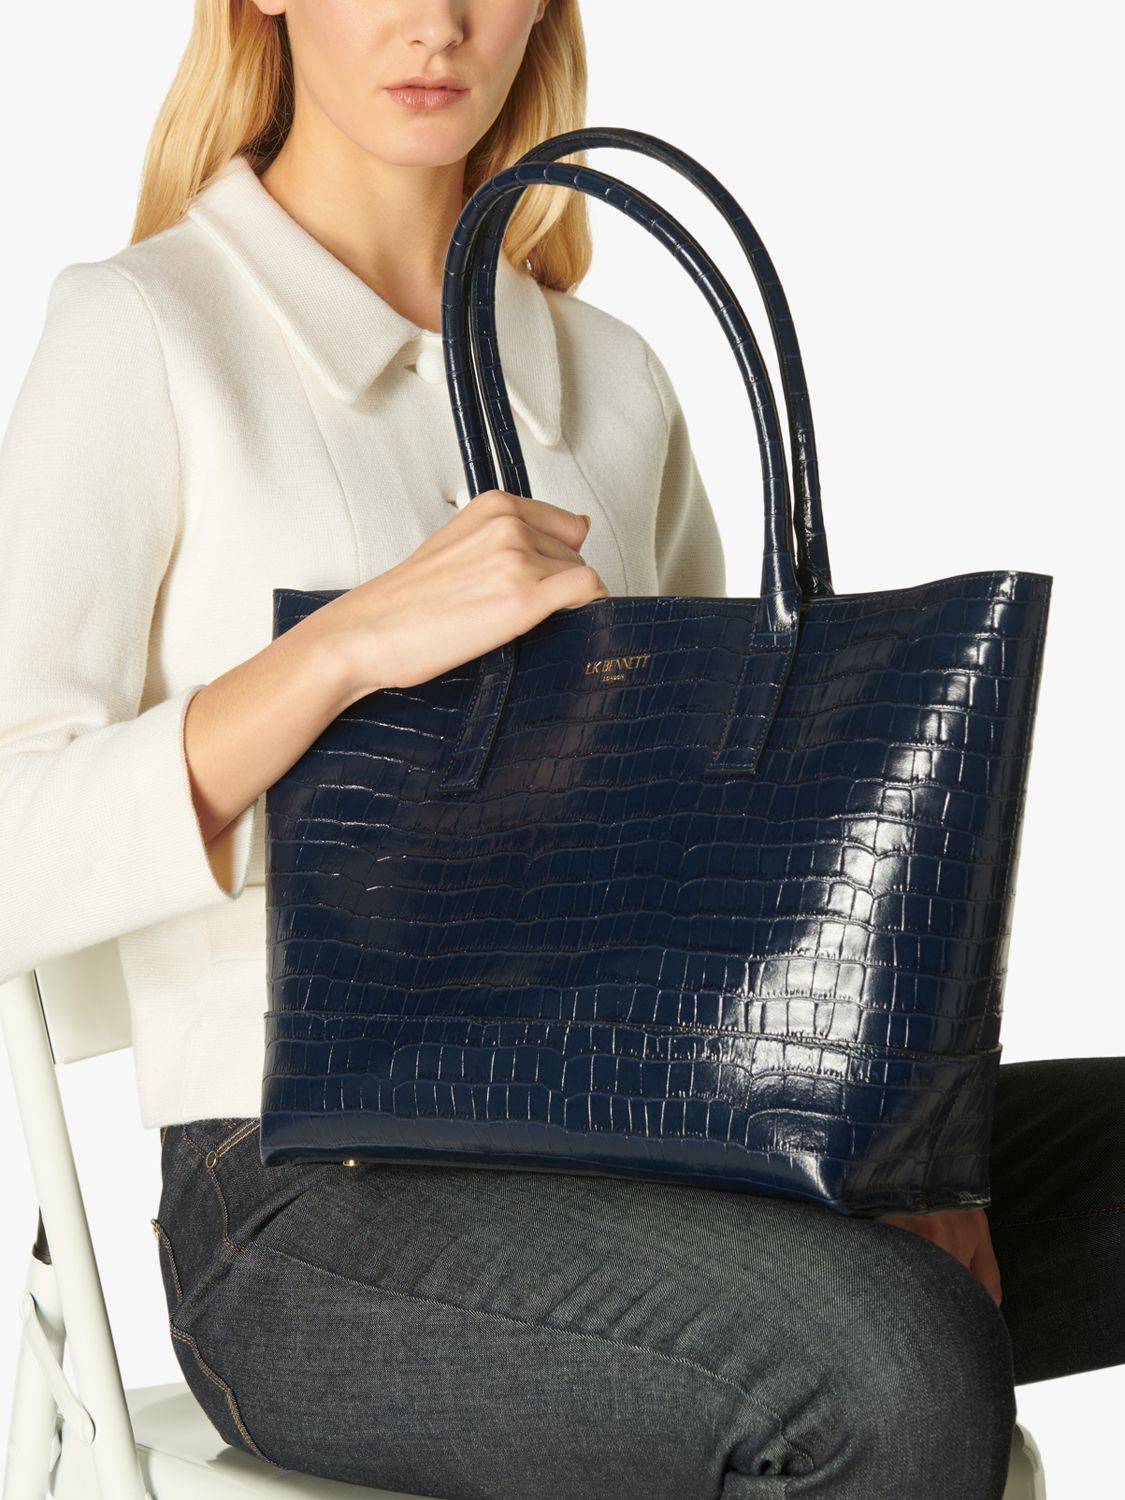 L.K.Bennett Lacey Leather Tote Bag, Navy at John Lewis & Partners